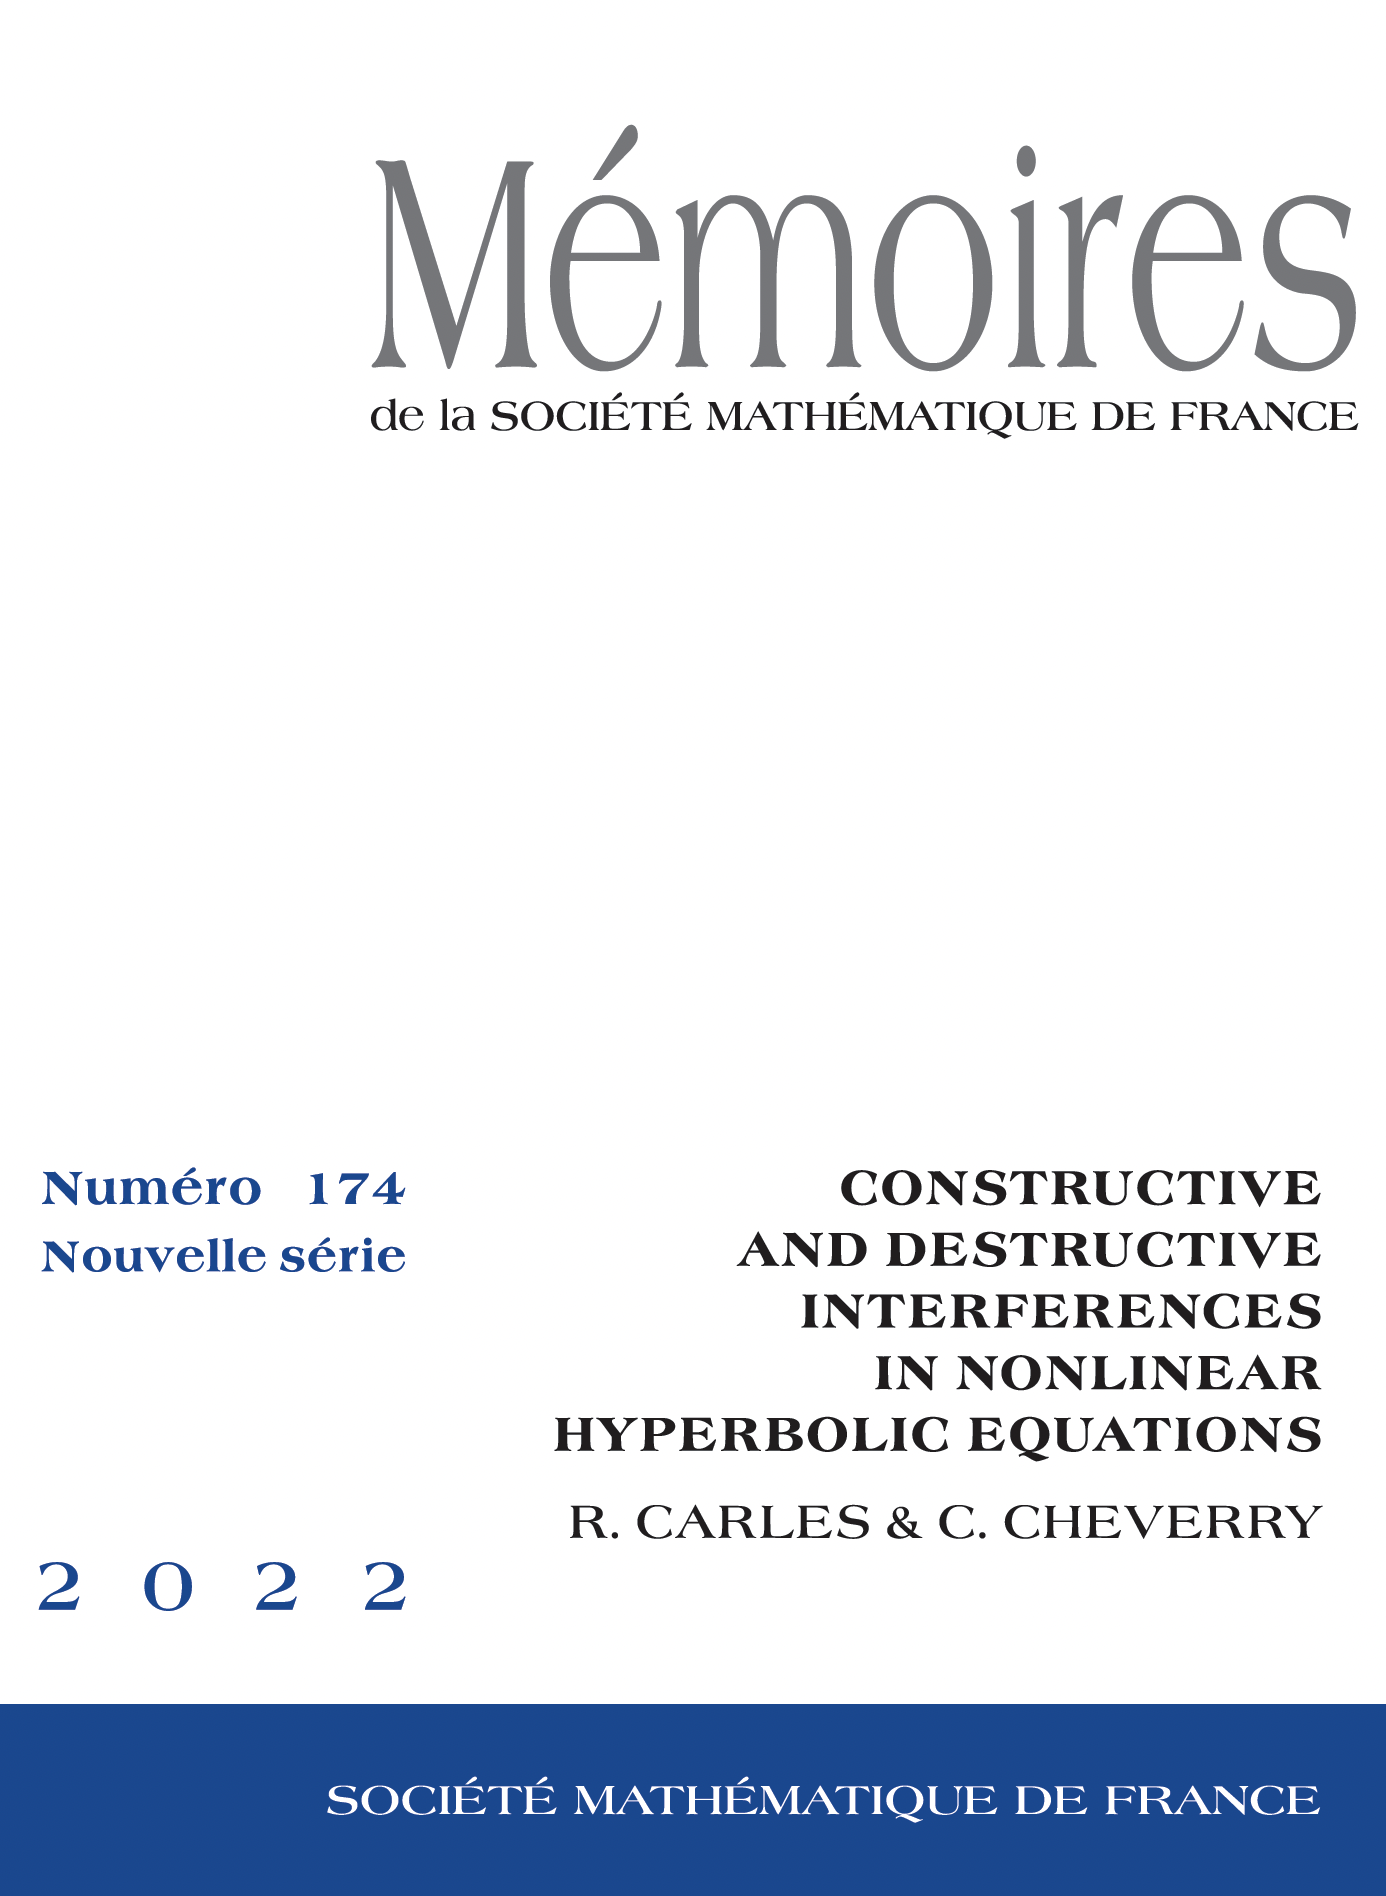 Constructive and destructive interferences in nonlinear hyperbolic equations